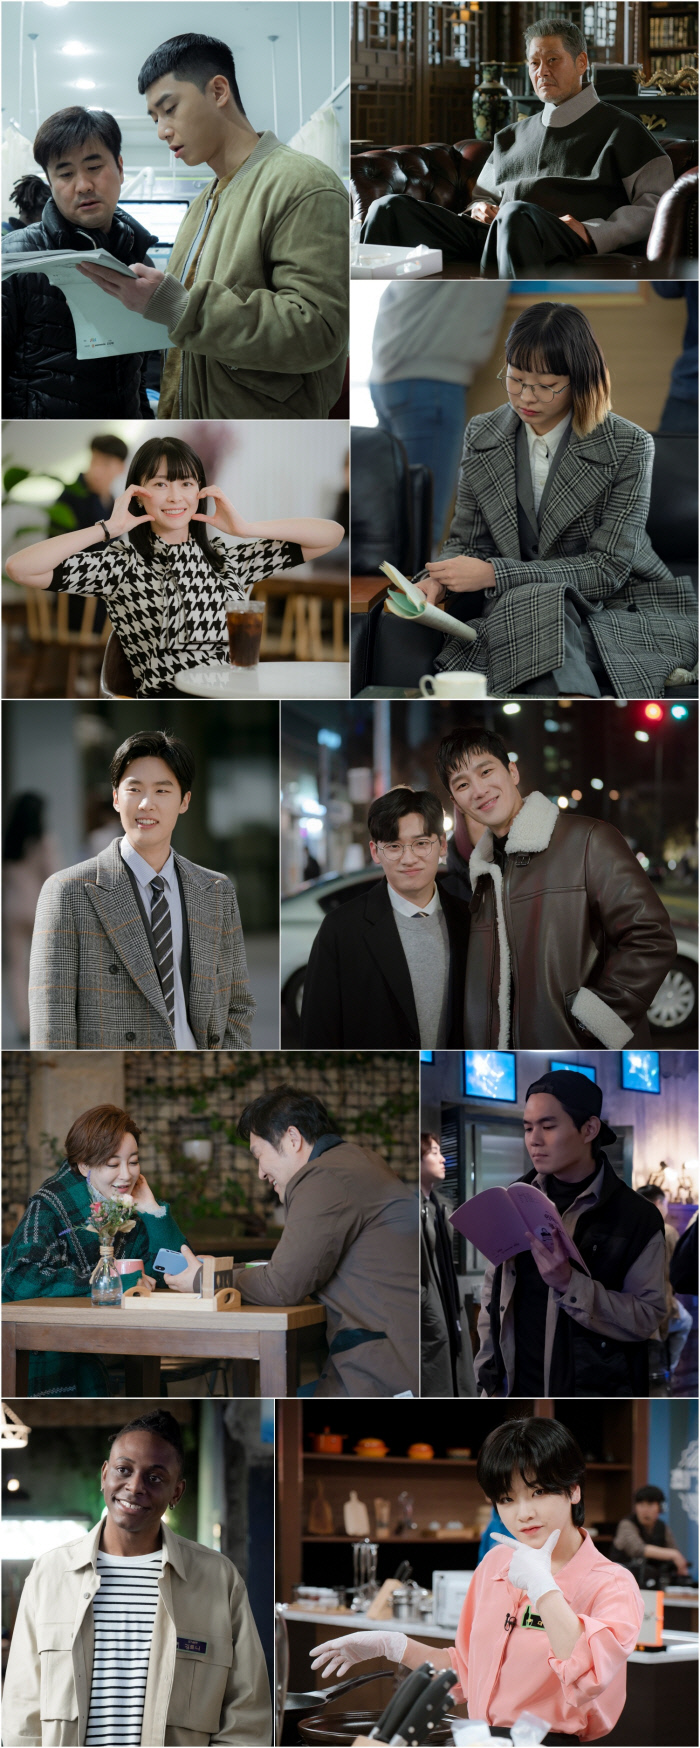 Itaewon Klath released a behind-the-scenes cut that would soothe regrets with only two times left to End.JTBCs Drama Itaewon Klath released a behind-the-scenes footage of Actors heart rate that infinitely increased viewers heart rate due to the hot energy and confident rebellion of young people.In the 14th episode, which aired on the 14th, Park Seo-joon (Roy) was portrayed as trying to ignore his mind toward Kim Da-mi (Joy).Feeling a late awakening and a squirming regret, he rushed to the hospital where Kim Da-mi was.However, a crisis arose as An Bo-hyeon (Jean The Fountainhead) and Won Hyun-joon (Kim Hee-hoon) kidnapped her as hostages.Park Seo-joon and Kim Dong-hee (Jang Geun-soo) stepped out to save Kim Da-mi, where Park Seo-joon, who threw himself instead toward the car that hit Kim Dong-hee, slowly lost consciousness.The fate of the two people, Park Seo-joon, who was at risk for his life in an unexpected accident, and Kim Da-mi, who was missing, amplified his curiosity.Itaewon Klath has been catching both the ratings and the topical rabbits and continuing the syndrome craze to the last minute.With Park Seo-joon and Yoo Jae-myung (Chang Dae-hee) facing each other in the final round, the industrys No. 1 contest between Janga Group and I.C. also offers a tense tension.Especially, the presence of Actors who have enhanced immersion and persuasiveness by drawing detailed Acting changes in the character over the past four years was more brilliant than ever.In the Korean portal site Navers daily search term (as of March 16), Kim Da-mis Joy Seo ranked first, Park Seo-joons Park Seo-joon ranked second, followed by The Fountainhead, 5th place Ma Hyun-i (Lee Joo-young), 6th place Jang Geun-soo, and 7th place Oh Soo-ah (Kwon Nara) The team showed off its strength by taking control of the rankings in succession.In the photo released on the day, the hot-rolled momentum of the hot actors was captured, as if the cold of the flower spring would blow away.Park Seo-joon and Kim Da-mi, the main characters of the irrefutable syndrome craze, are attracted to the scene of the script.Park Seo-joons eyes are serious, sharing his opinions carefully with director Kim Sung-yoon, ambassador, and Feeling.It is the secret of the birth of Park Seo-joon Park, who made the room shake with a thrilling Qatarsis and a dull impression.Kim Da-mis passion for not releasing the script in his hand even before the moment of shooting is also different.Her performance, which depicted an intense character she had never seen before, in her own color, provoked an explosive reaction every time.Yoo Jae-myeongs presence, which overwhelms the crowd with one eye, is also tough.Yoo Jae-myeong is holding the center of the drama with a charismatic and cool tension through the authoritarian aspect of the chairman who opposes the conviction of Park.Kwon Nara emits a lovely charm with a pretty pose and a smile full of charm toward the camera.Her tearful act, which delicately depicted the confusing Feeling of Osua between Janga Group and Park Roy in the last broadcast, also stood out.In the following photo, Kim Dong-hee, who is playing the role of Jang Geun-soo, who returned to the managing director of Jangga Group, is making an acting transformation.Lee David (Lee Ho-jin), who once again sparked vengeance with the reunion with The Fountainhead, but the warm-hearted mode of An Bo-hyeon and Lee David, who smile and smile on their shoulders, gives a reversal.From the cheerful appearance of Kim Hye-eun (Kang Min-jung) and Yoon Kyung-ho (Oh Byung-hun), who make a laughing appearance during the filming break, Ryu Kyung-soo (Choi Seung-kwon), Lee Ju-young (Ma Hyun-yi), and Chris Ryan (Kim Toni), who are hard-carrying with character, are also handed down to three-color youth energy.Itaewon Klath was also a different scene in the class, said the production team.Actors tight acting breathing and synergy were perfect.  As we continue to shoot with our best efforts until the end, please keep an eye on the constant love and interest.Whatever you imagine, you will be impressed and Qatarsis more than expected. Meanwhile, the 15th episode of Itaewon Klath, which has only two episodes left to End, will be broadcast on JTBC at 10:50 p.m. on the 20th (Friday).